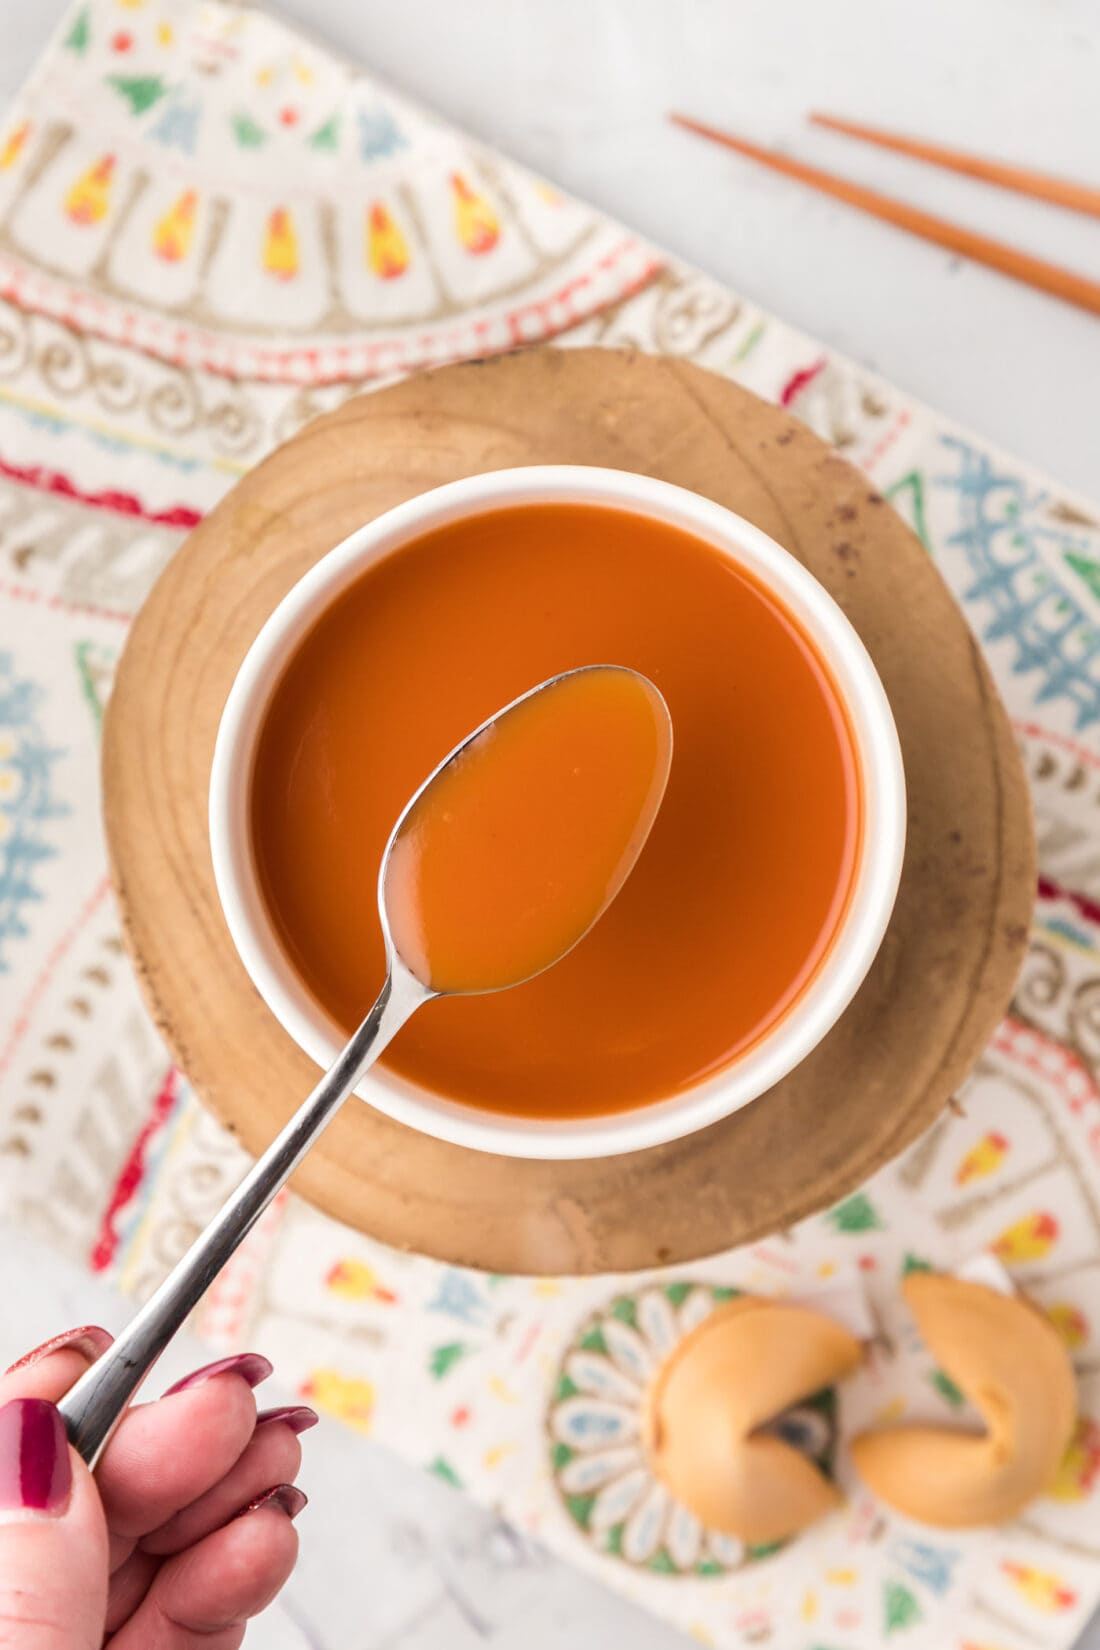 Spoonful of Sweet and Sour Sauce held over a bowl of Sweet and Sour Sauce